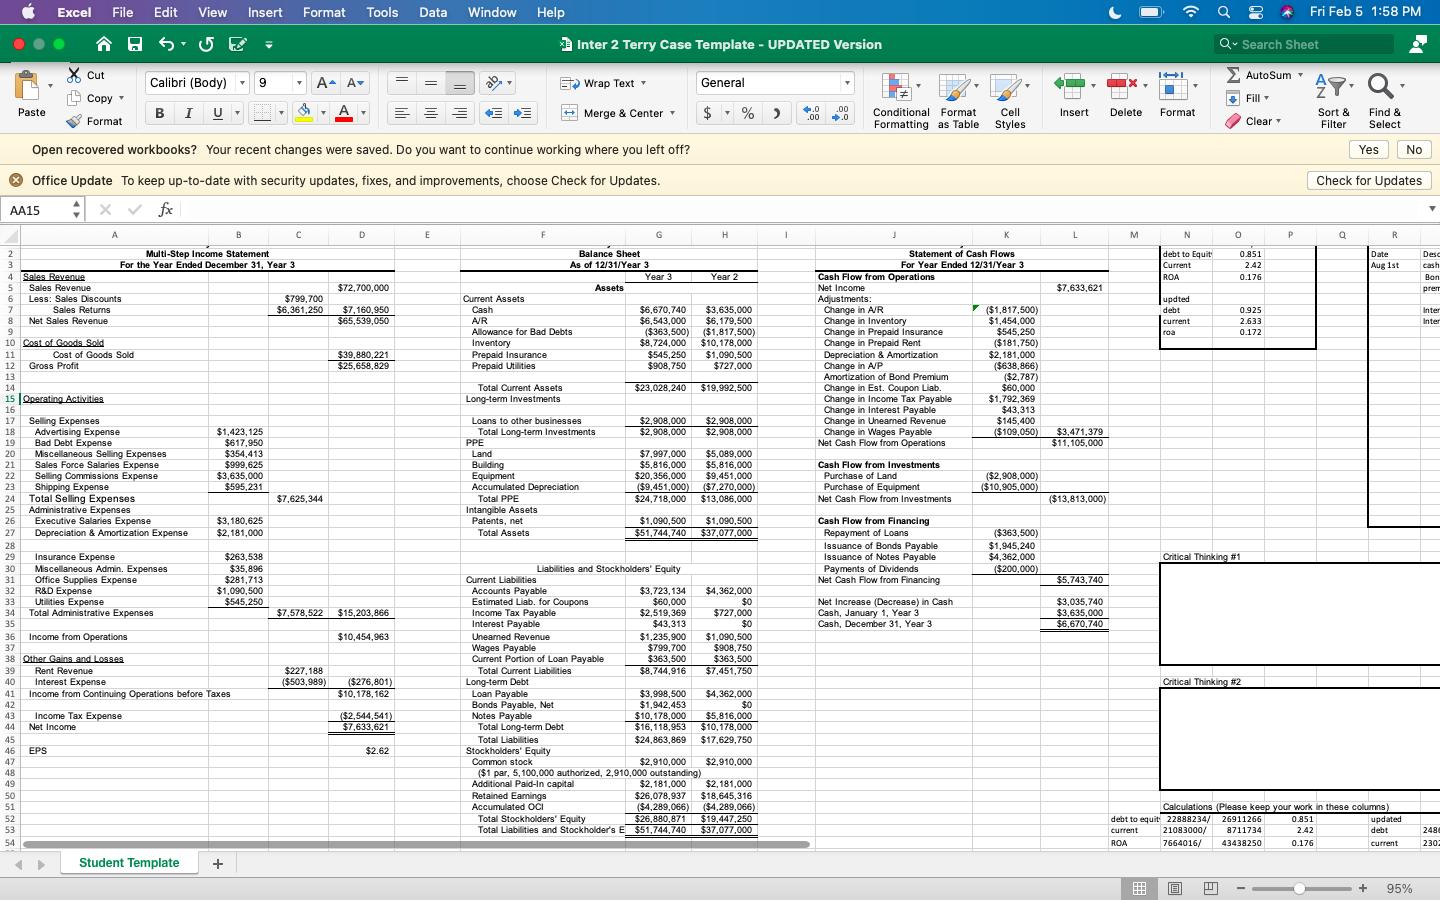 Excel File Edit View Insert Format Tools Data Window Help Fri Feb 5 1:58 PM Inter 2 Terry Case Template - UPDATED Version Q-